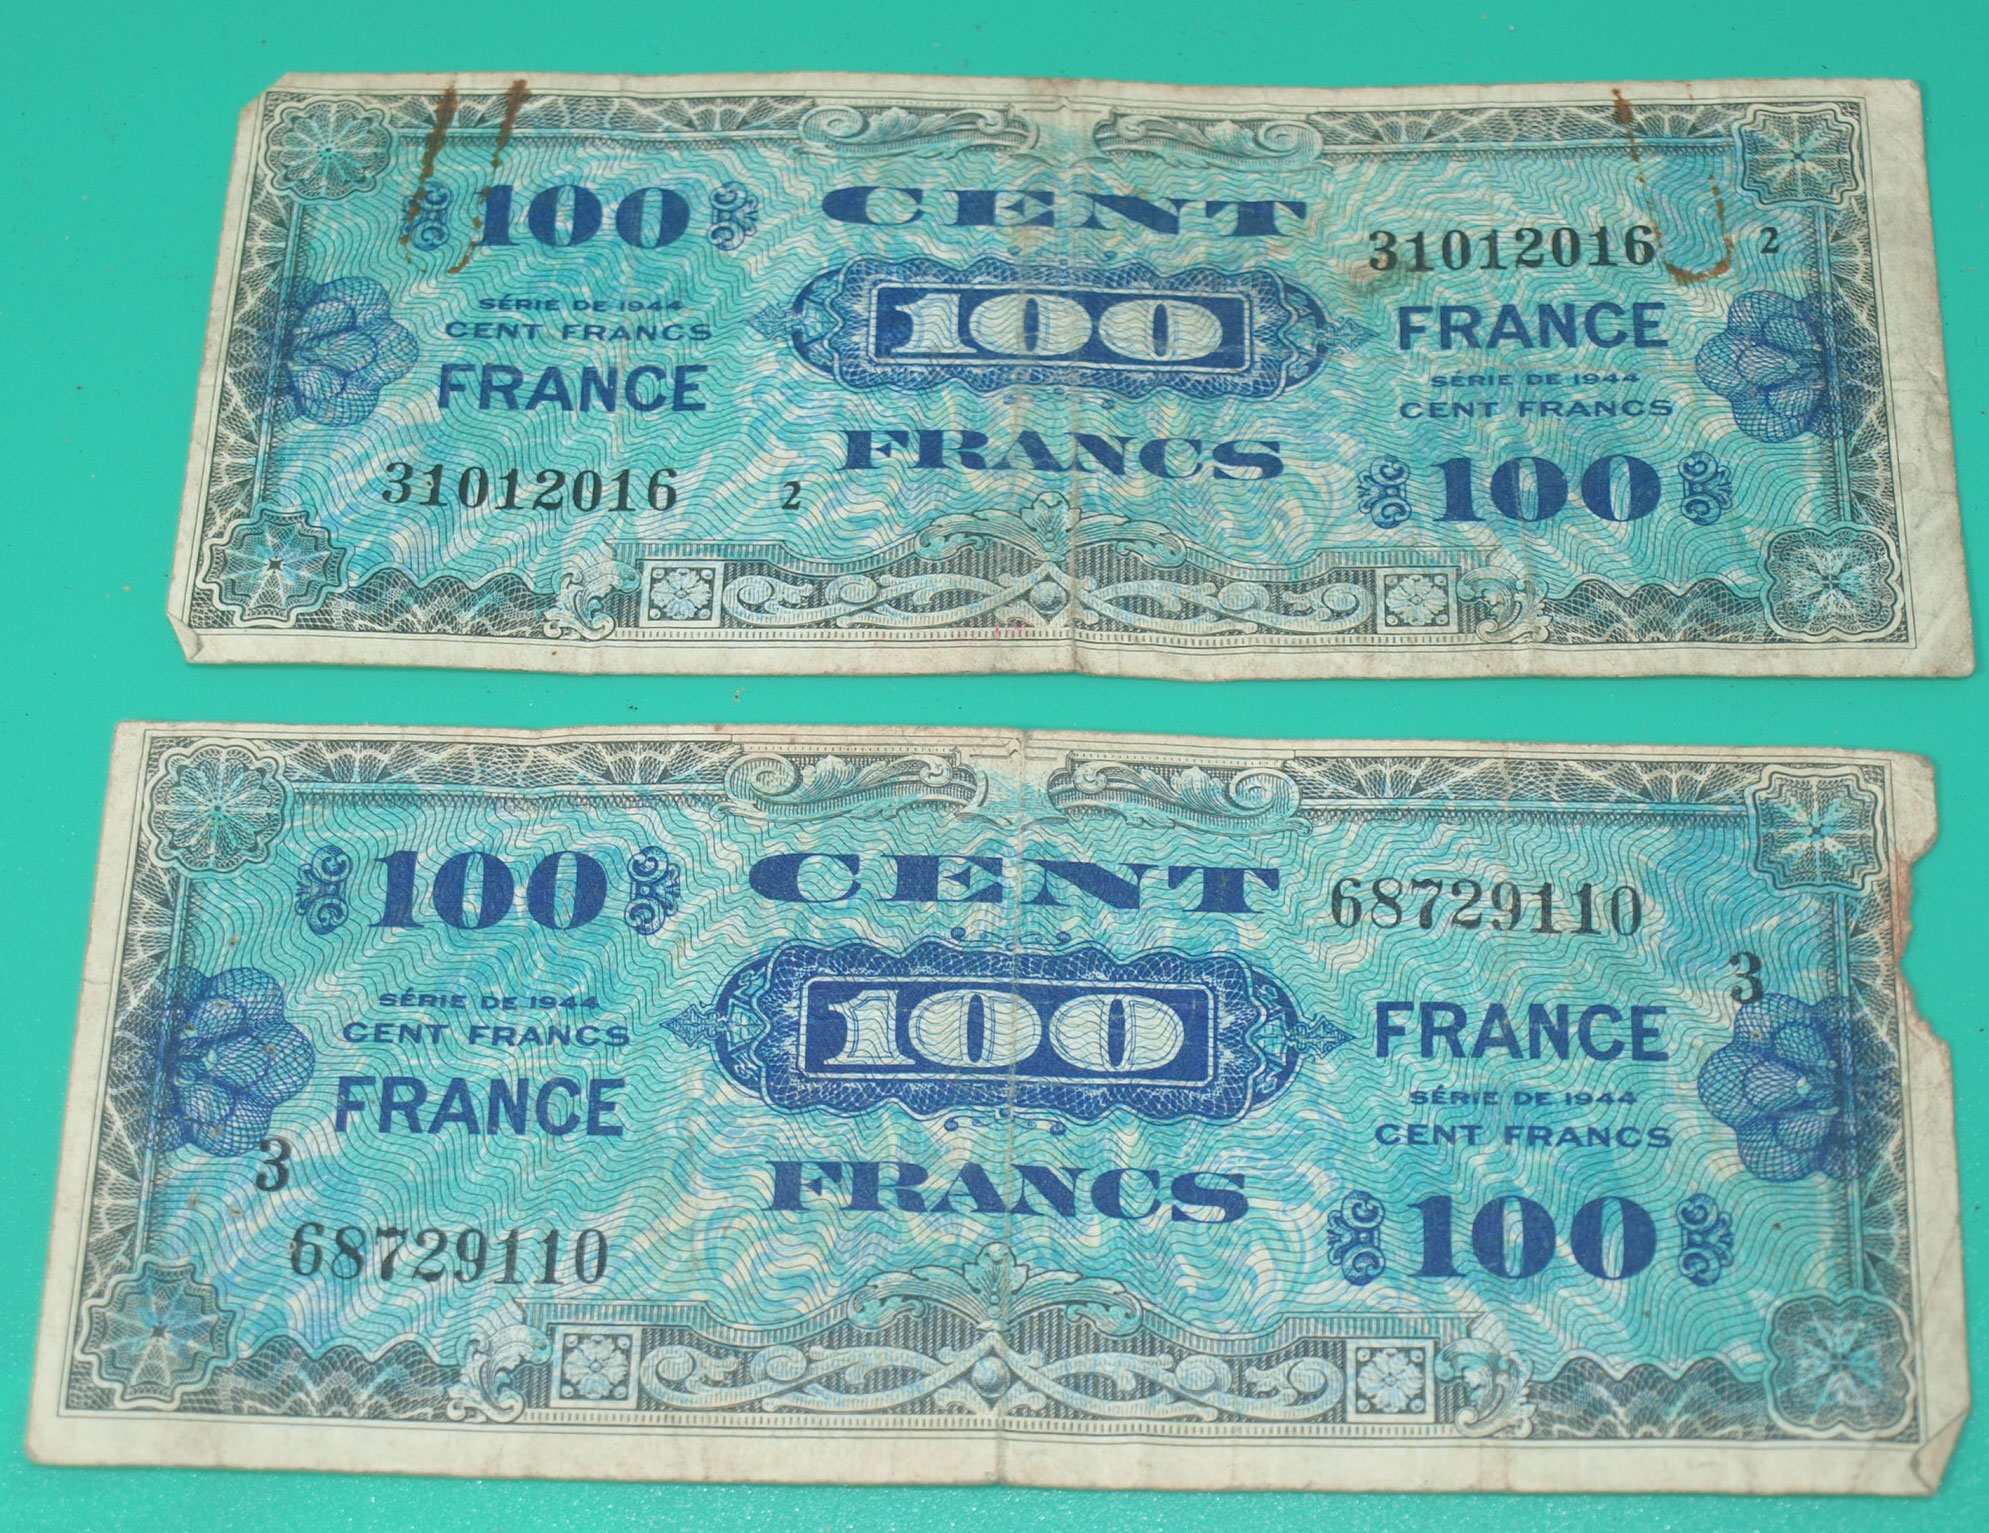 100 Franc Notes, 1944 issue £10 each